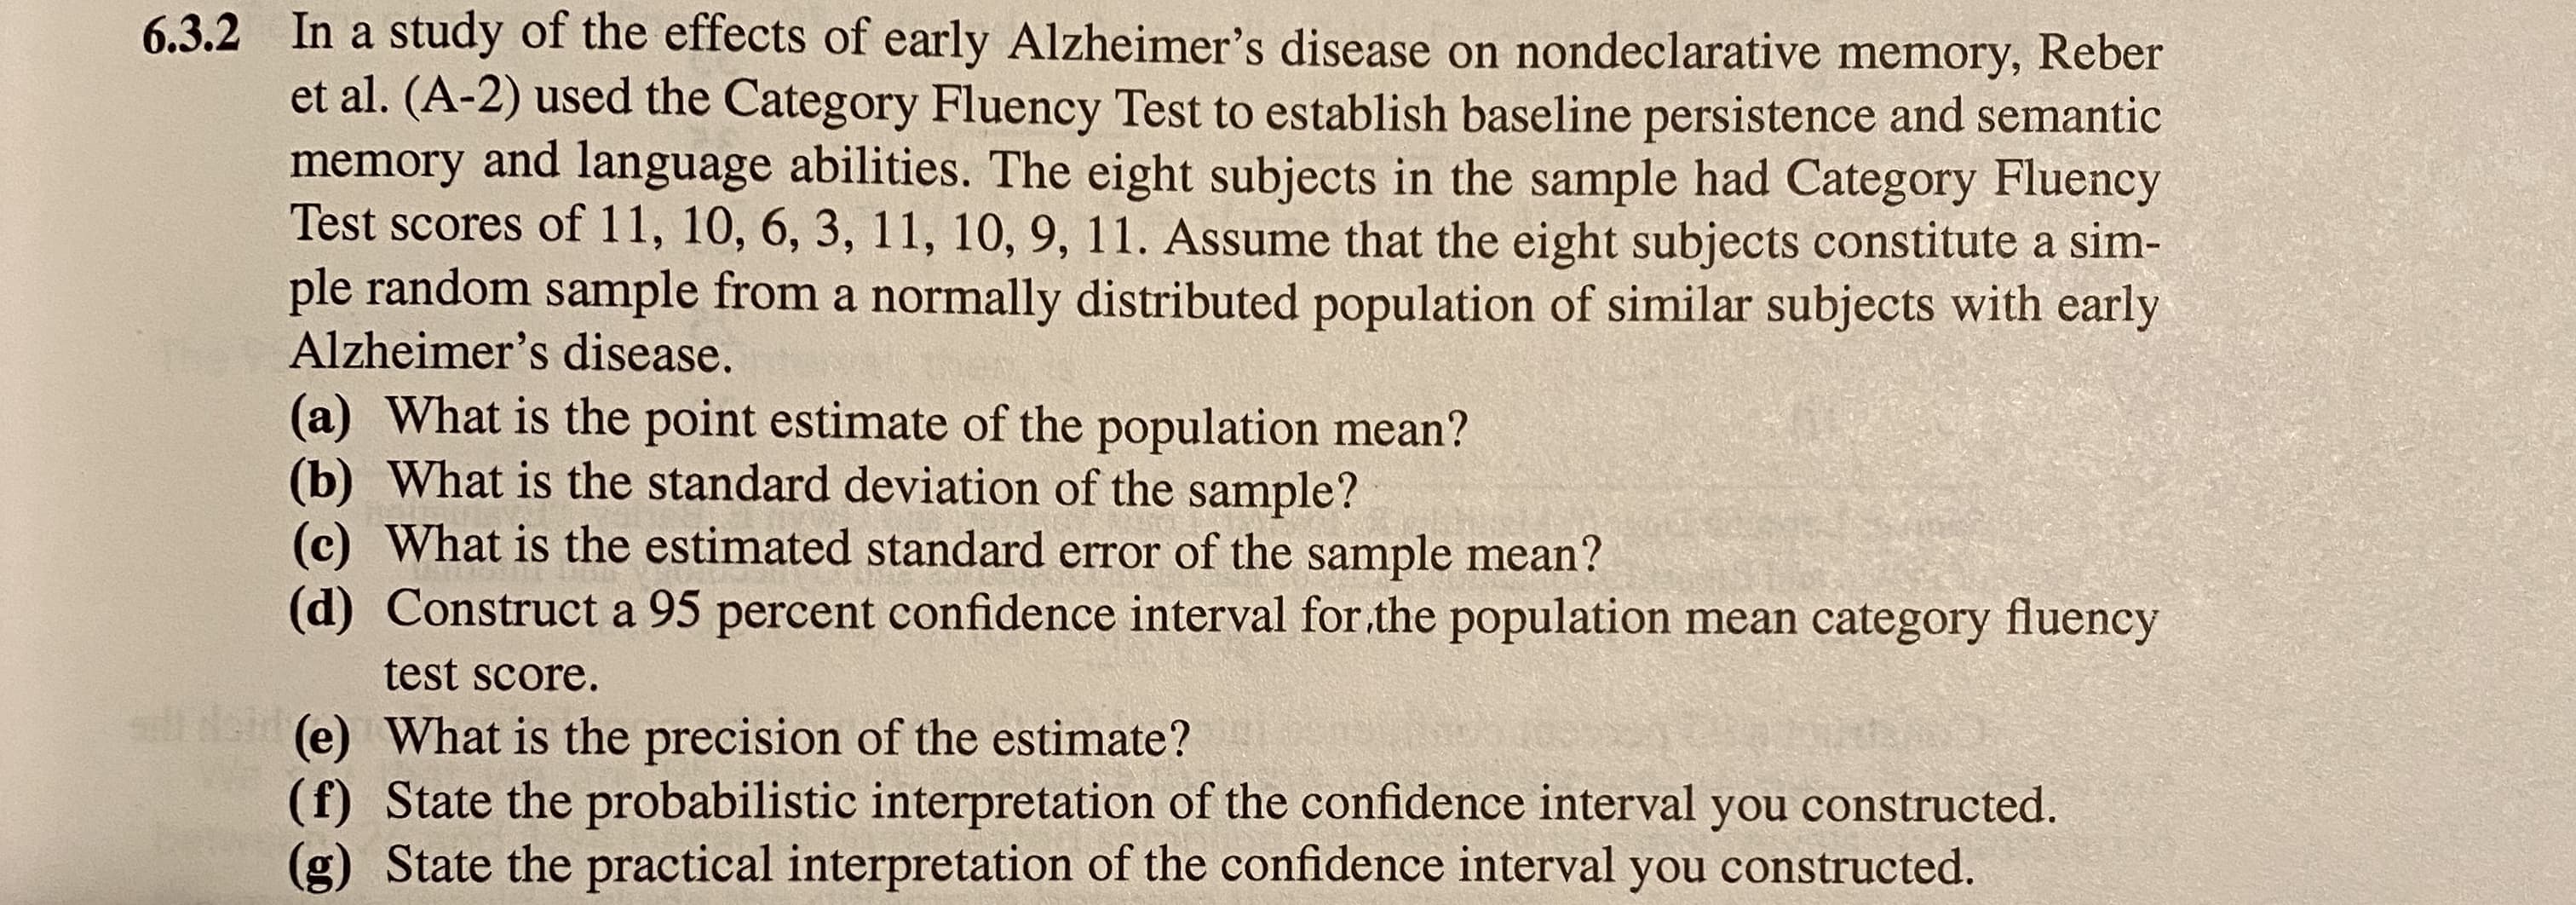 6.3.2 In a study of the effects of early Alzheimer's disease on nondeclarative memory, Reber
et al. (A-2) used the Category Fluency Test to establish baseline persistence and semantic
memory and language abilities. The eight subjects in the sample had Category Fluency
Test scores of 11, 10, 6, 3, 11, 10, 9, 11. Assume that the eight subjects constitute a sim-
ple random sample from a normally distributed population of similar subjects with early
Alzheimer's disease.
(a) What is the point estimate of the population mean?
(b) What is the standard deviation of the sample?
(c) What is the estimated standard error of the sample mean?
(d) Construct a 95 percent confidence interval for.the population mean category fluency
test score.
sll Noi (e) What is the precision of the estimate?
(f) State the probabilistic interpretation of the confidence interval you constructed.
(g) State the practical interpretation of the confidence interval you constructed.
